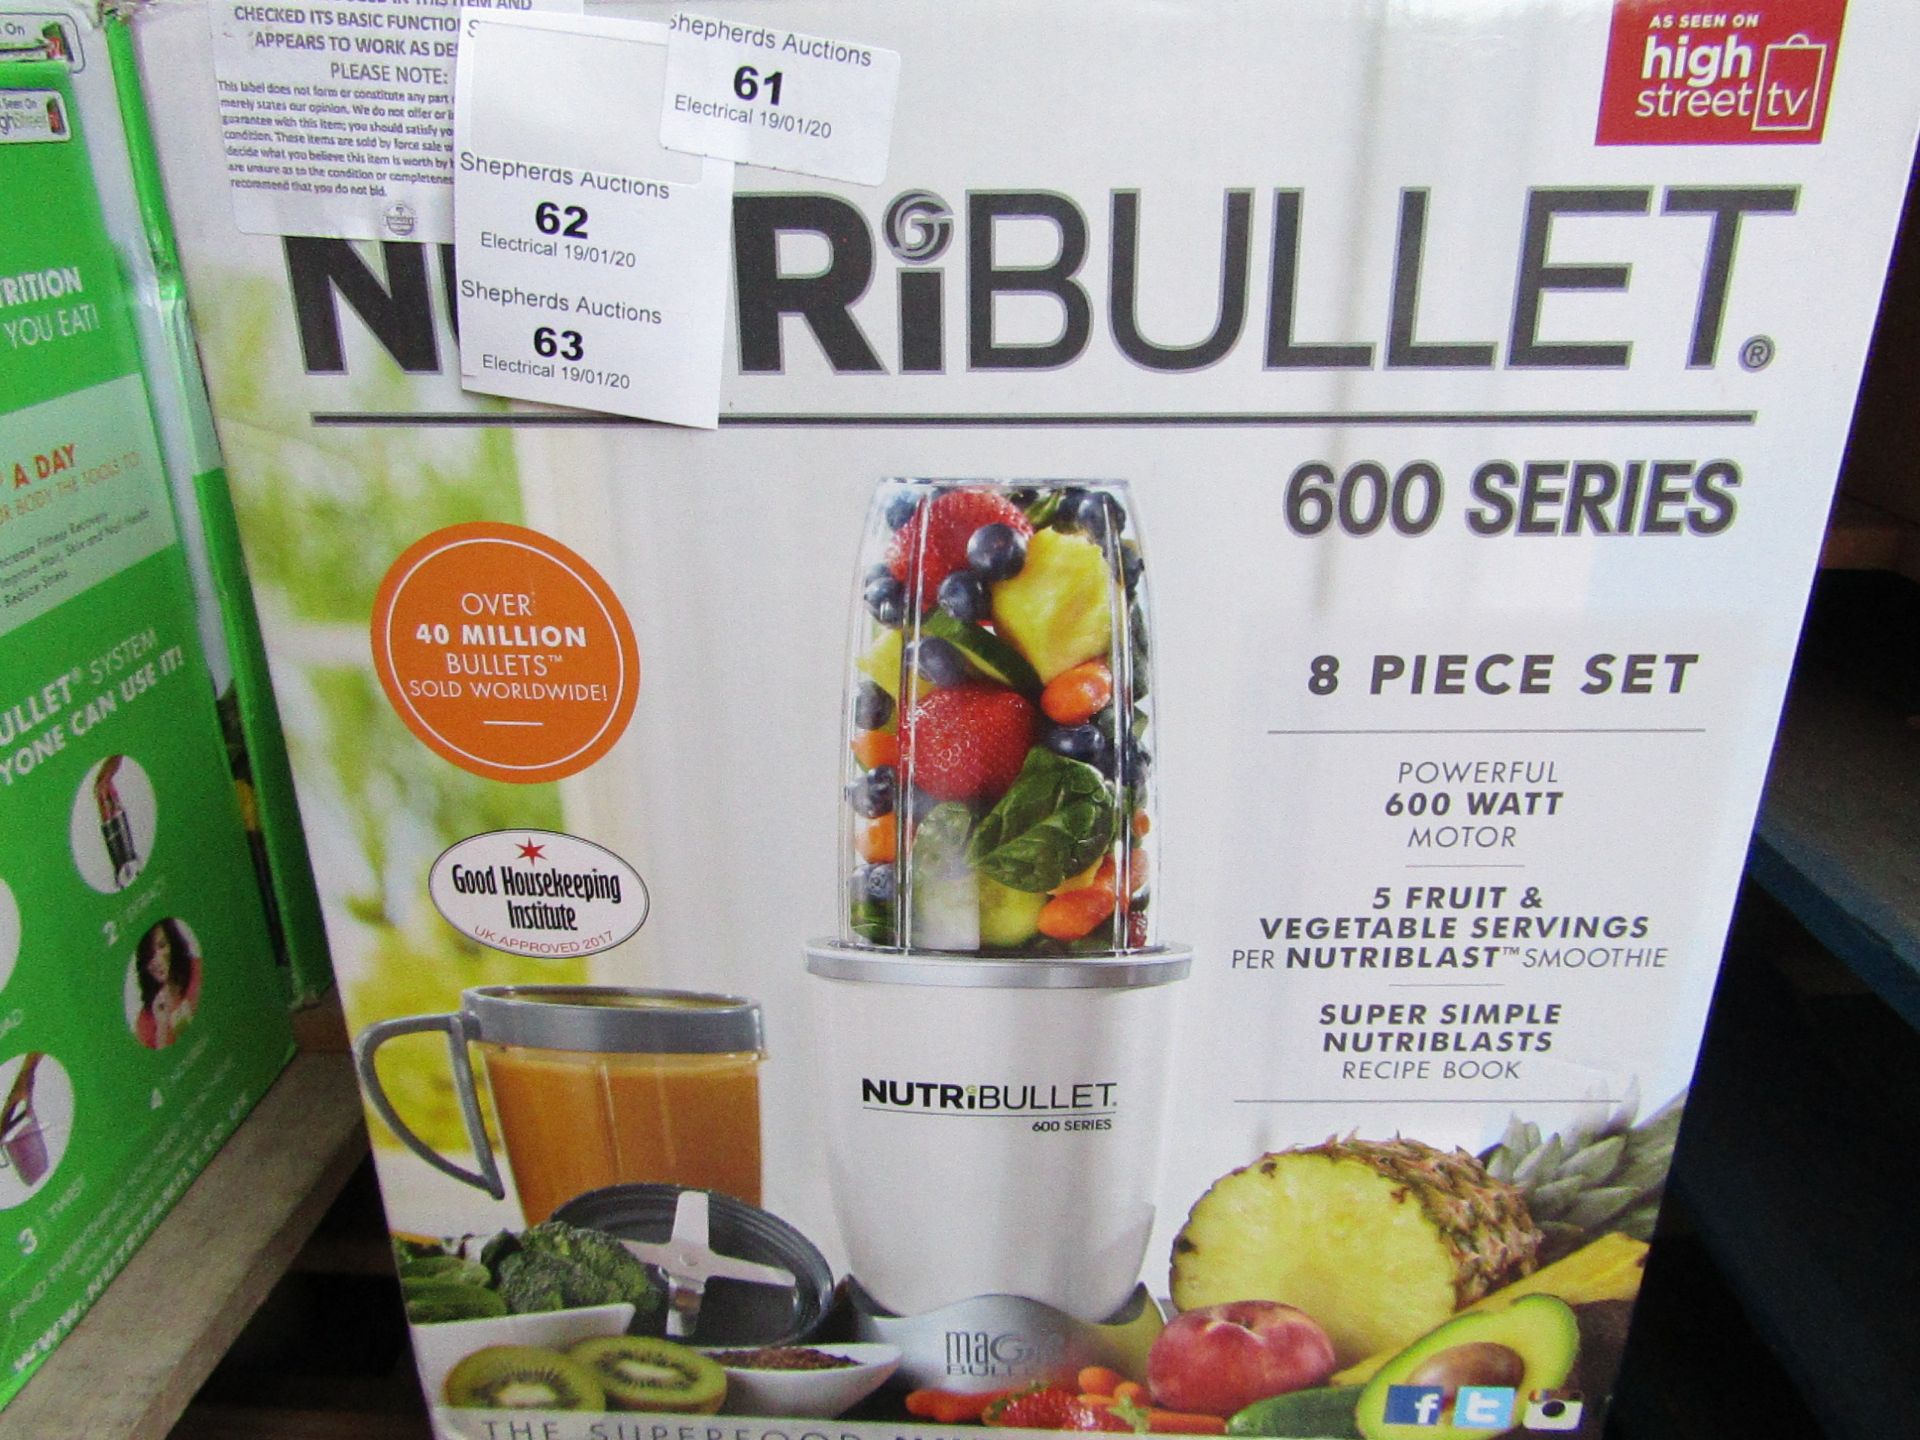 | 1x | nutribullet 600 series | unchecked and boxed | no online re-sale | Sku C5060191464352 |